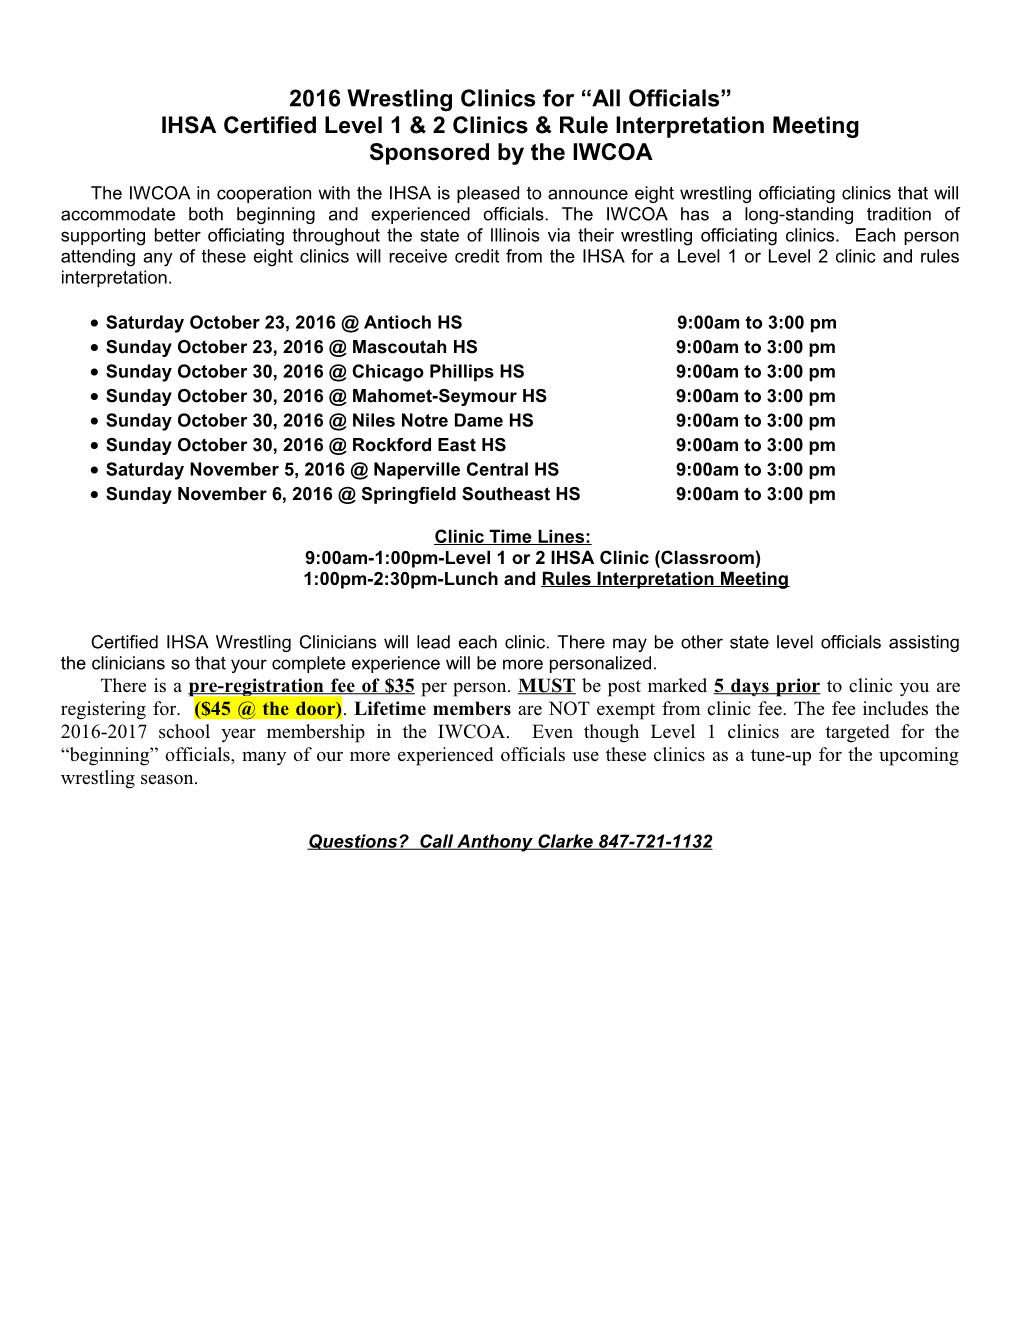 2014 Wrestling Clinics for All Officials